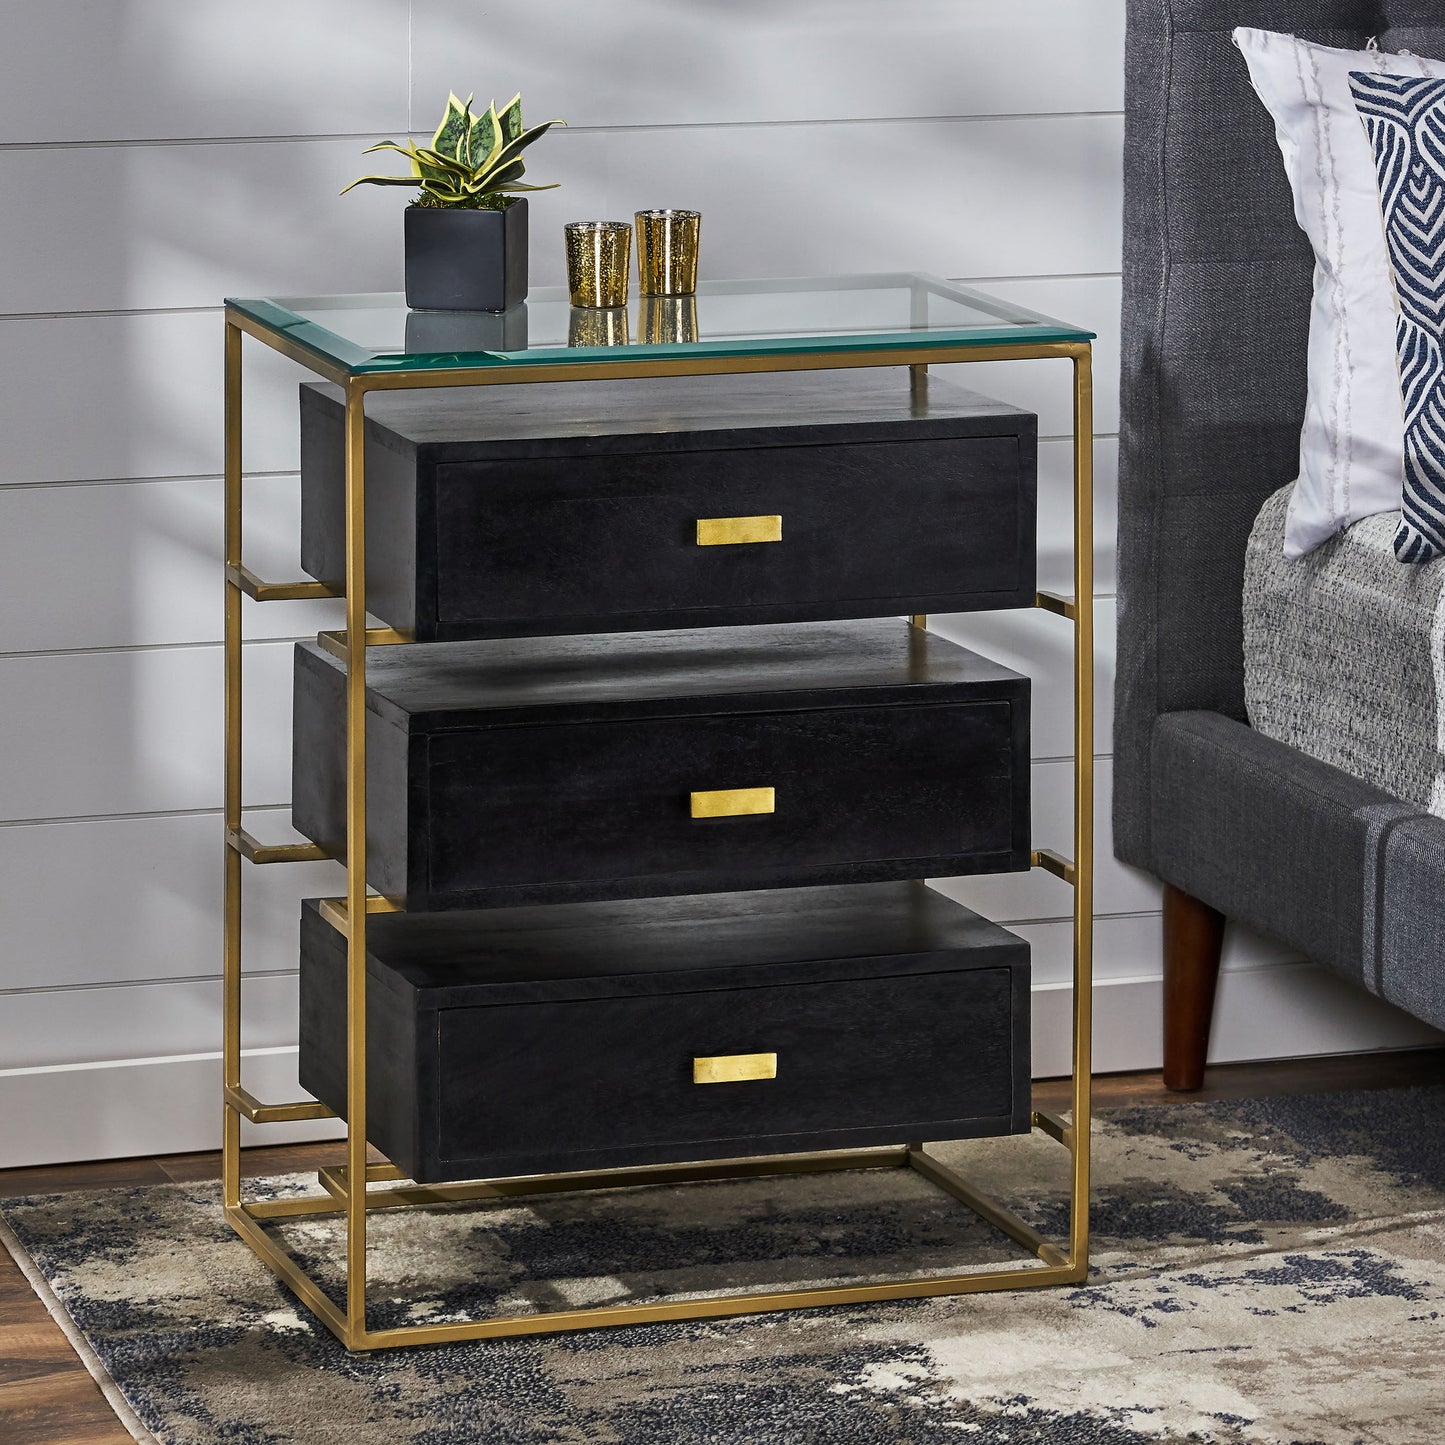 Sonne Modern Handcrafted 3 Drawer Glass Top Nightstand, Black and Brass